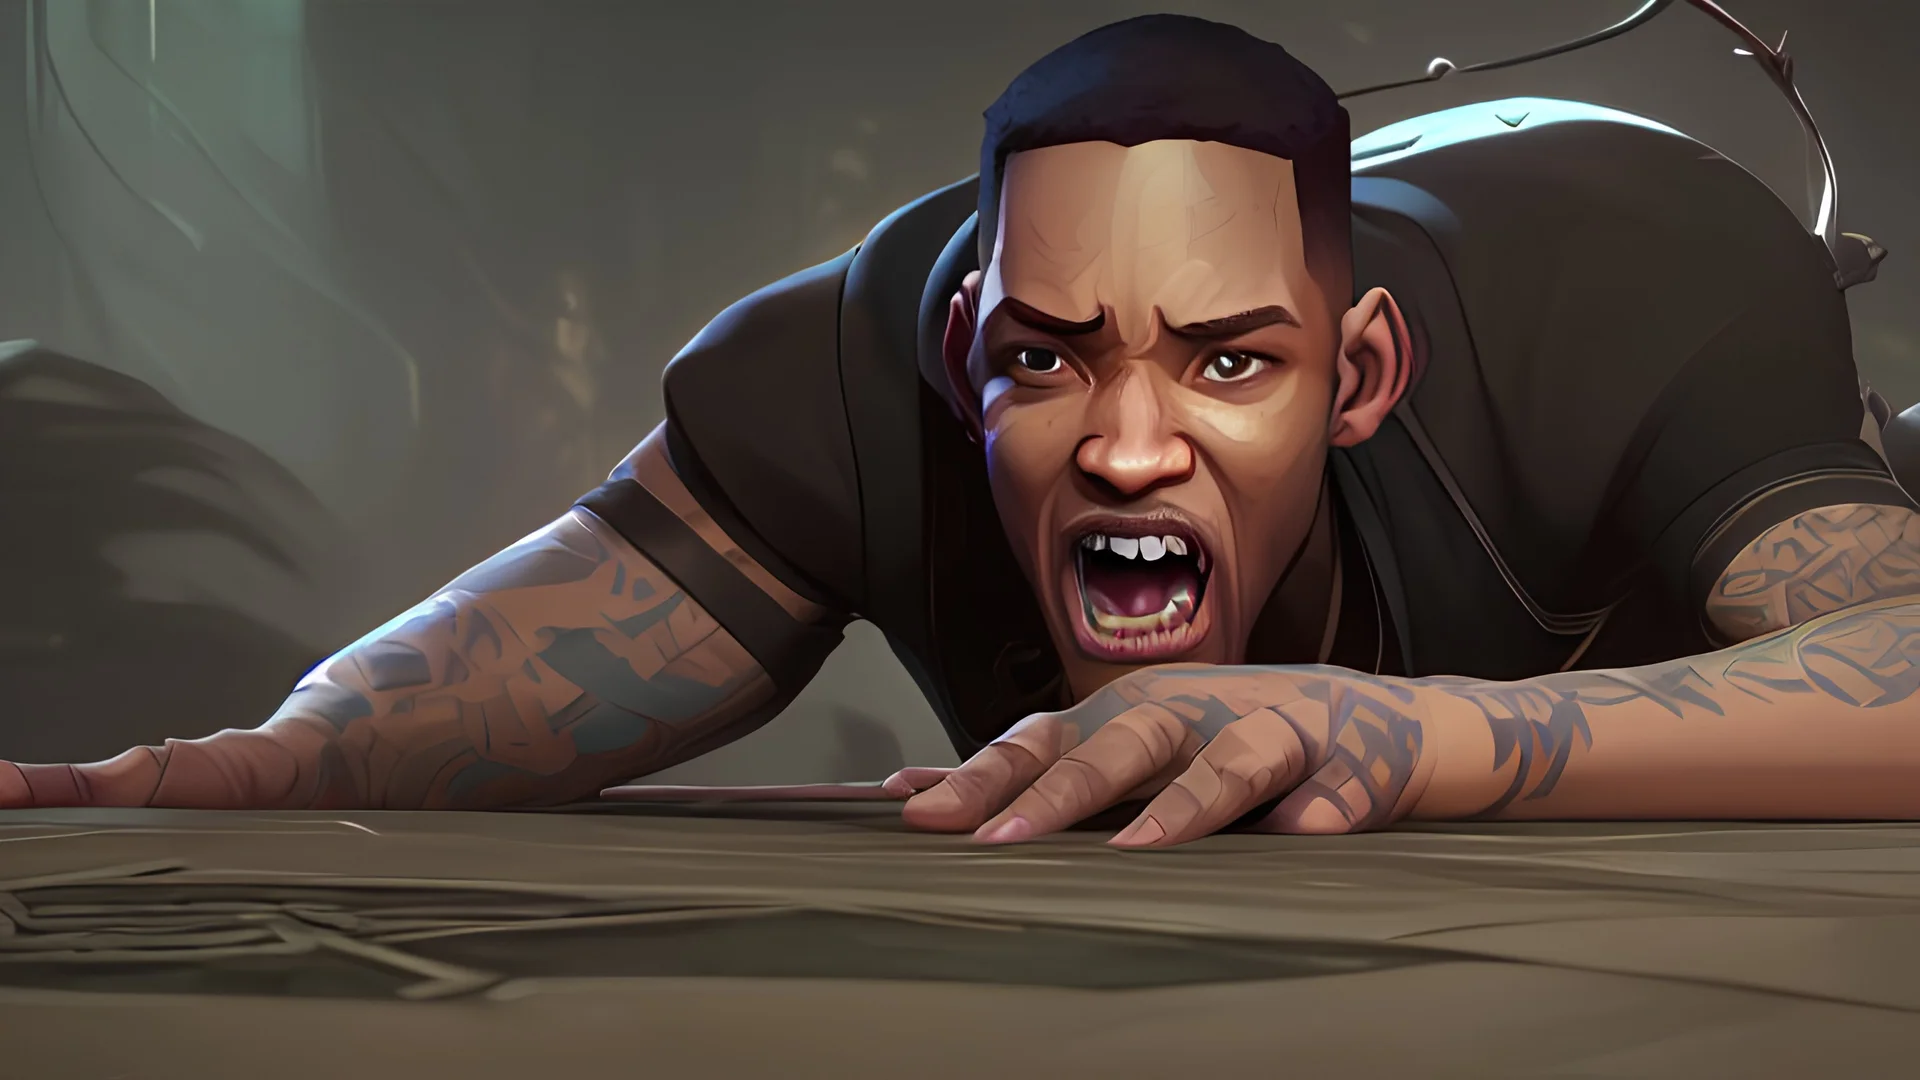 will smith crawling on all fours like a horror monster with his head turned 180 degrees around, crawling in a sewer in a dungeons and dragons fantasy world